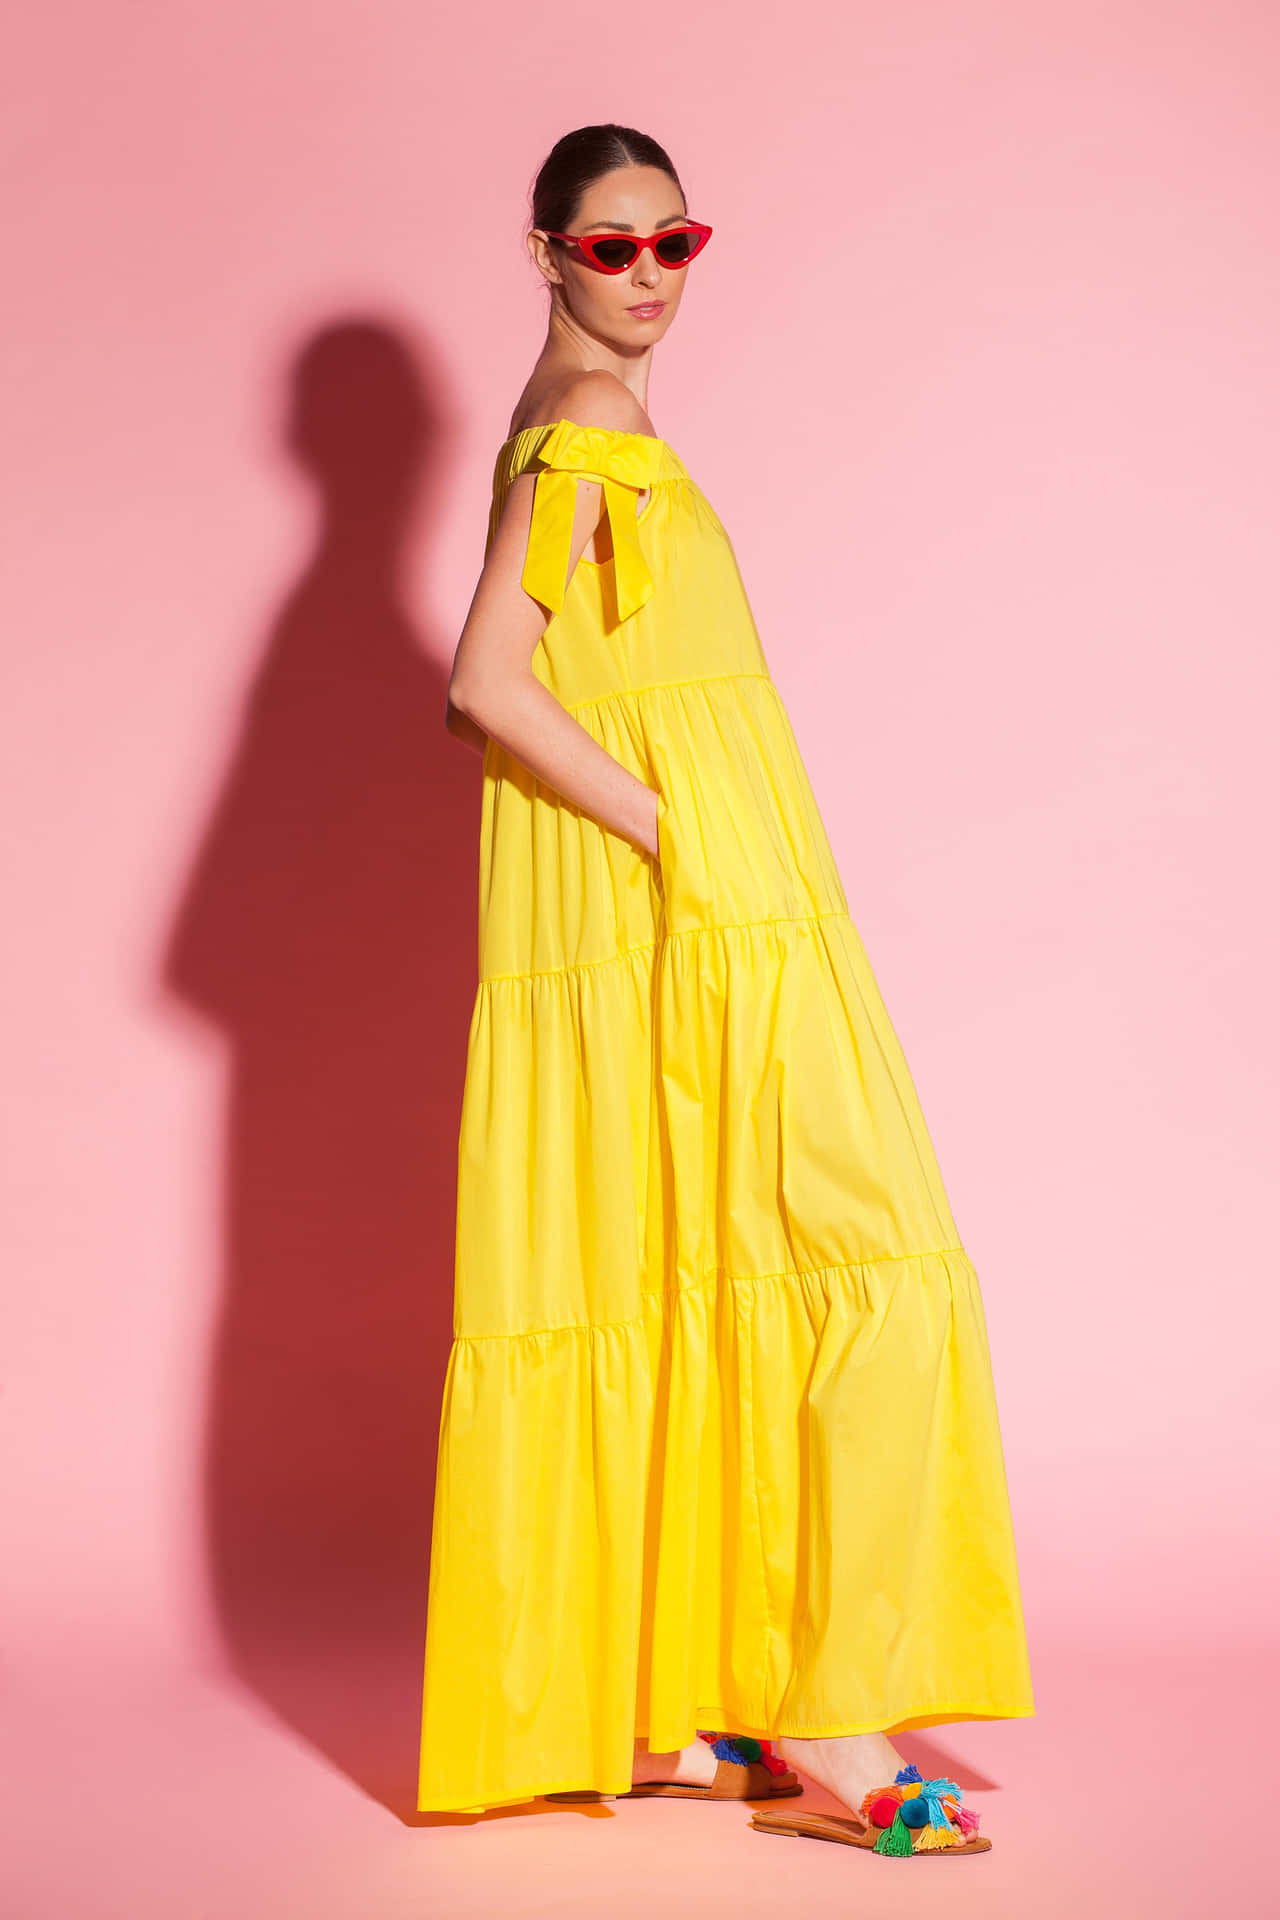 Glamorous woman in vibrant yellow haute couture outfit Wallpaper